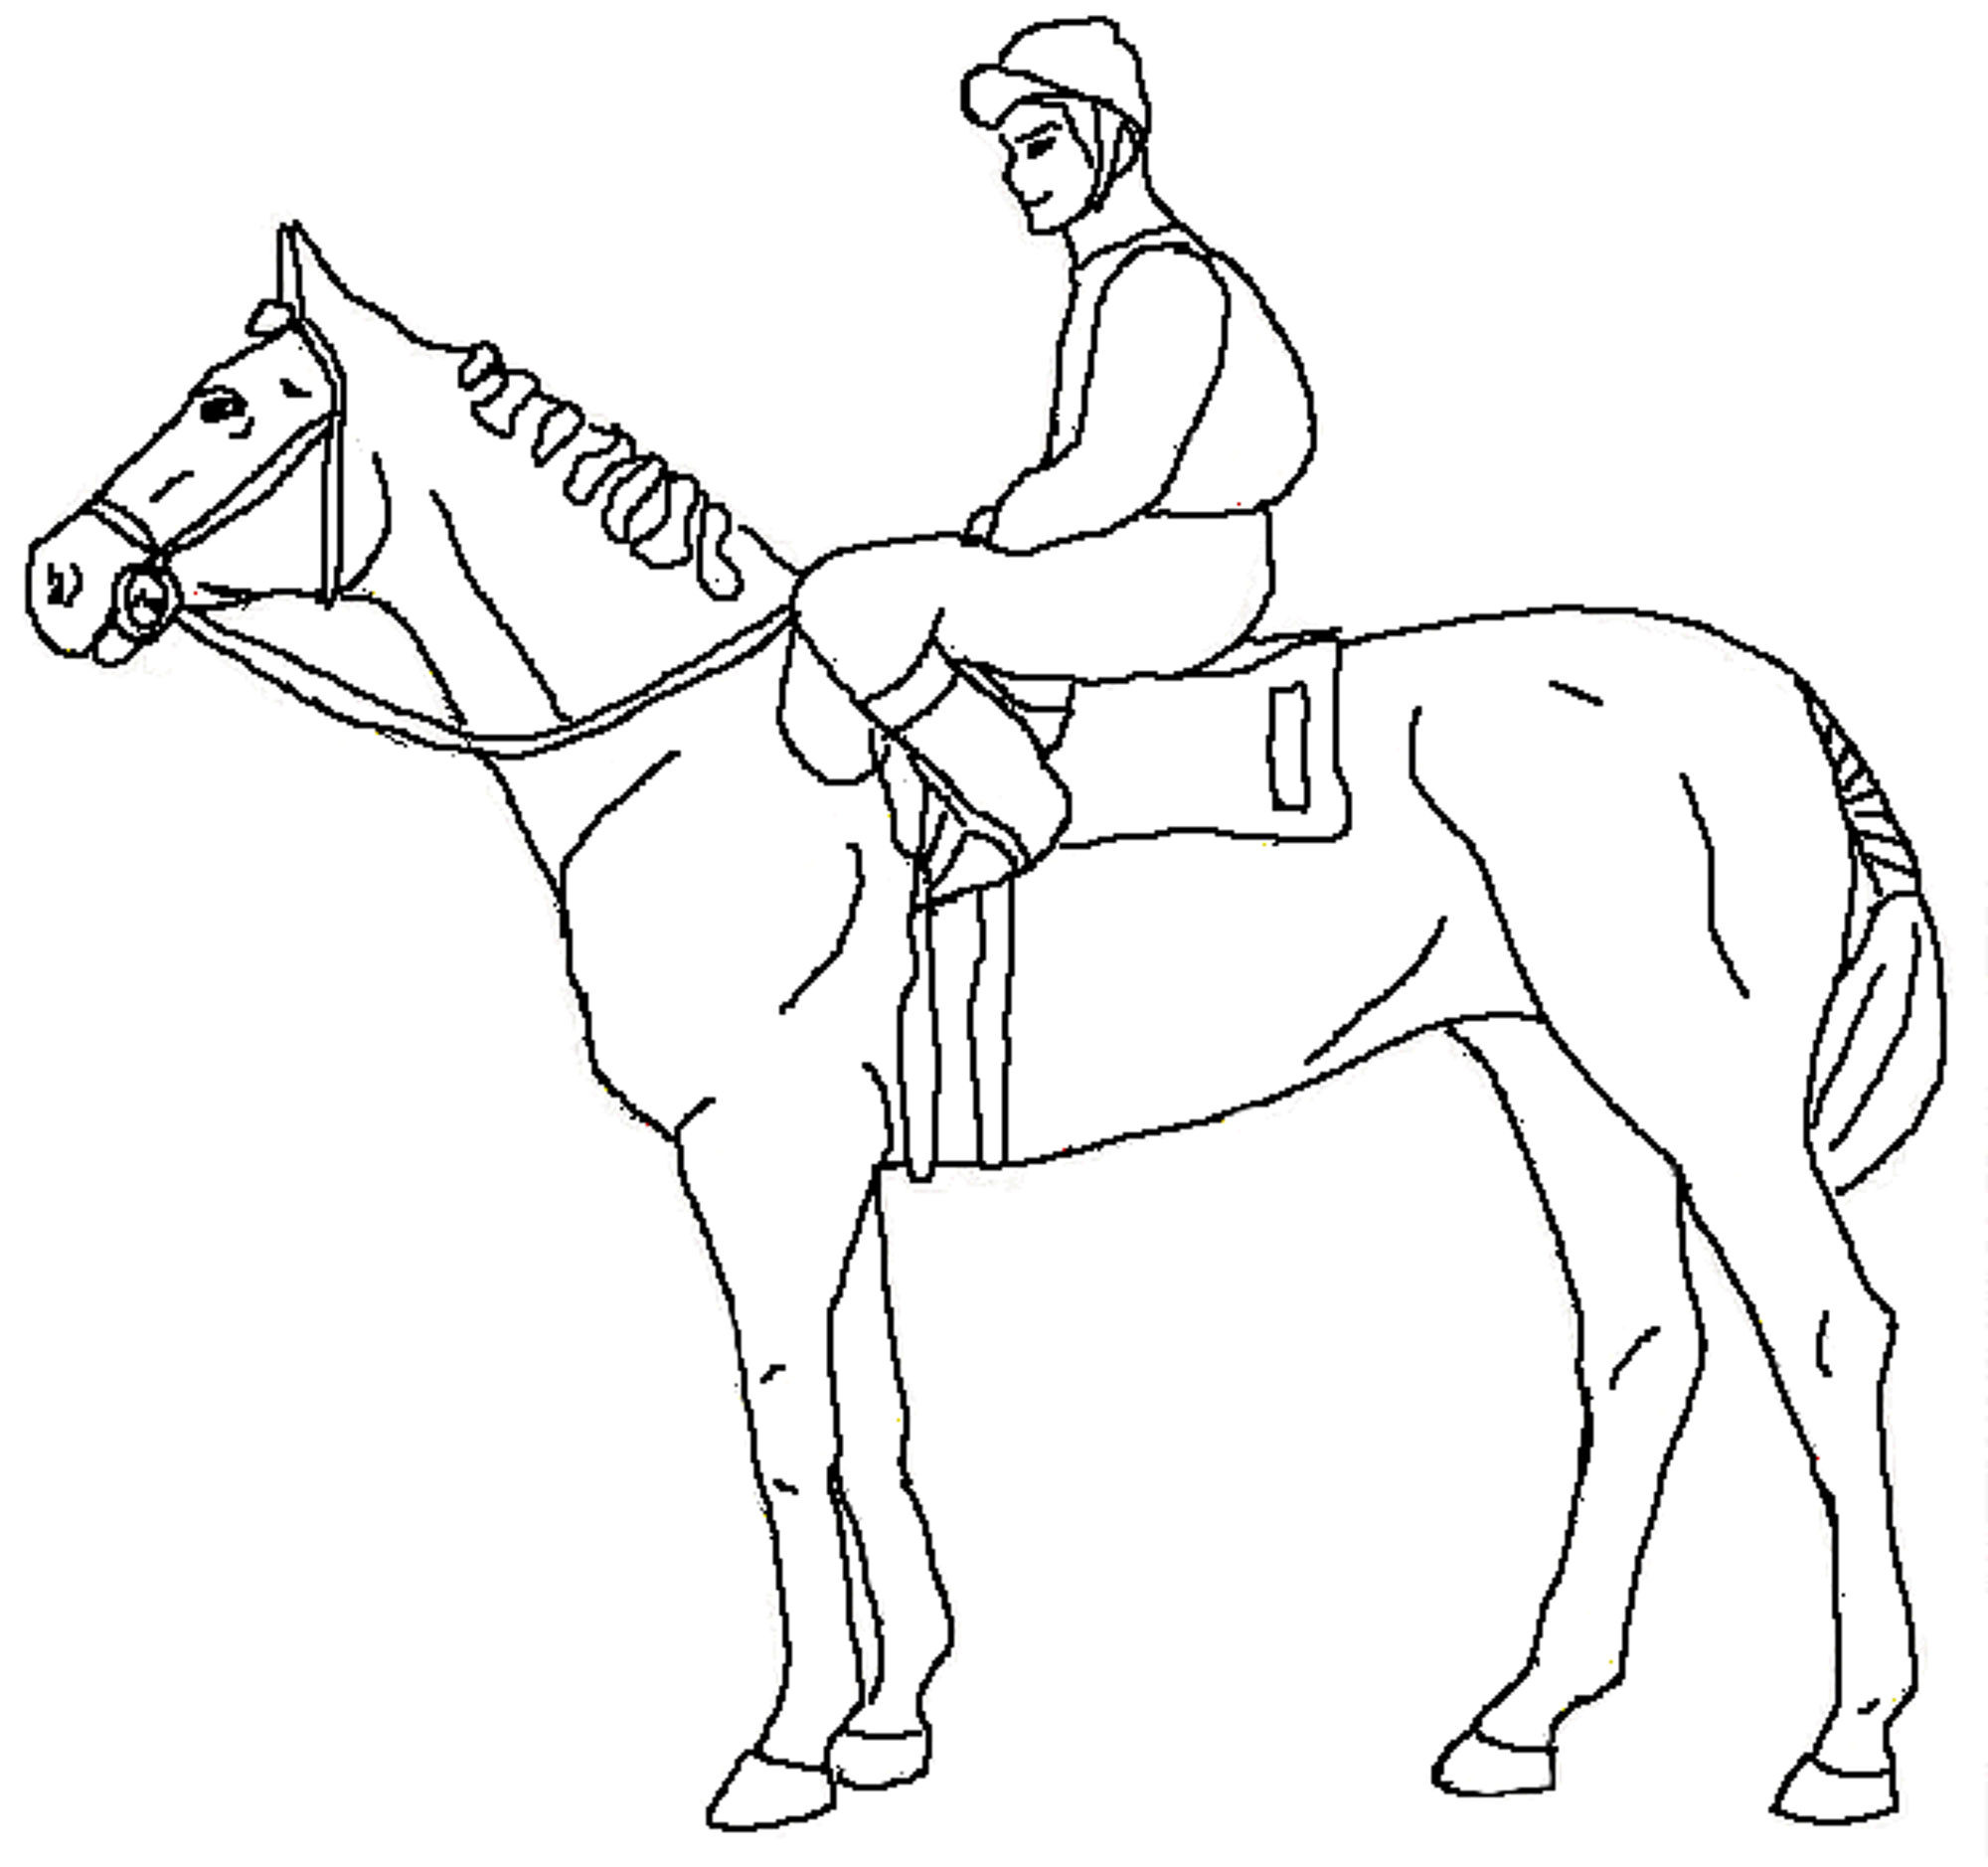 Horse Coloring Pages For Older Kids
 Fun Horse Coloring Pages for Your Kids Printable